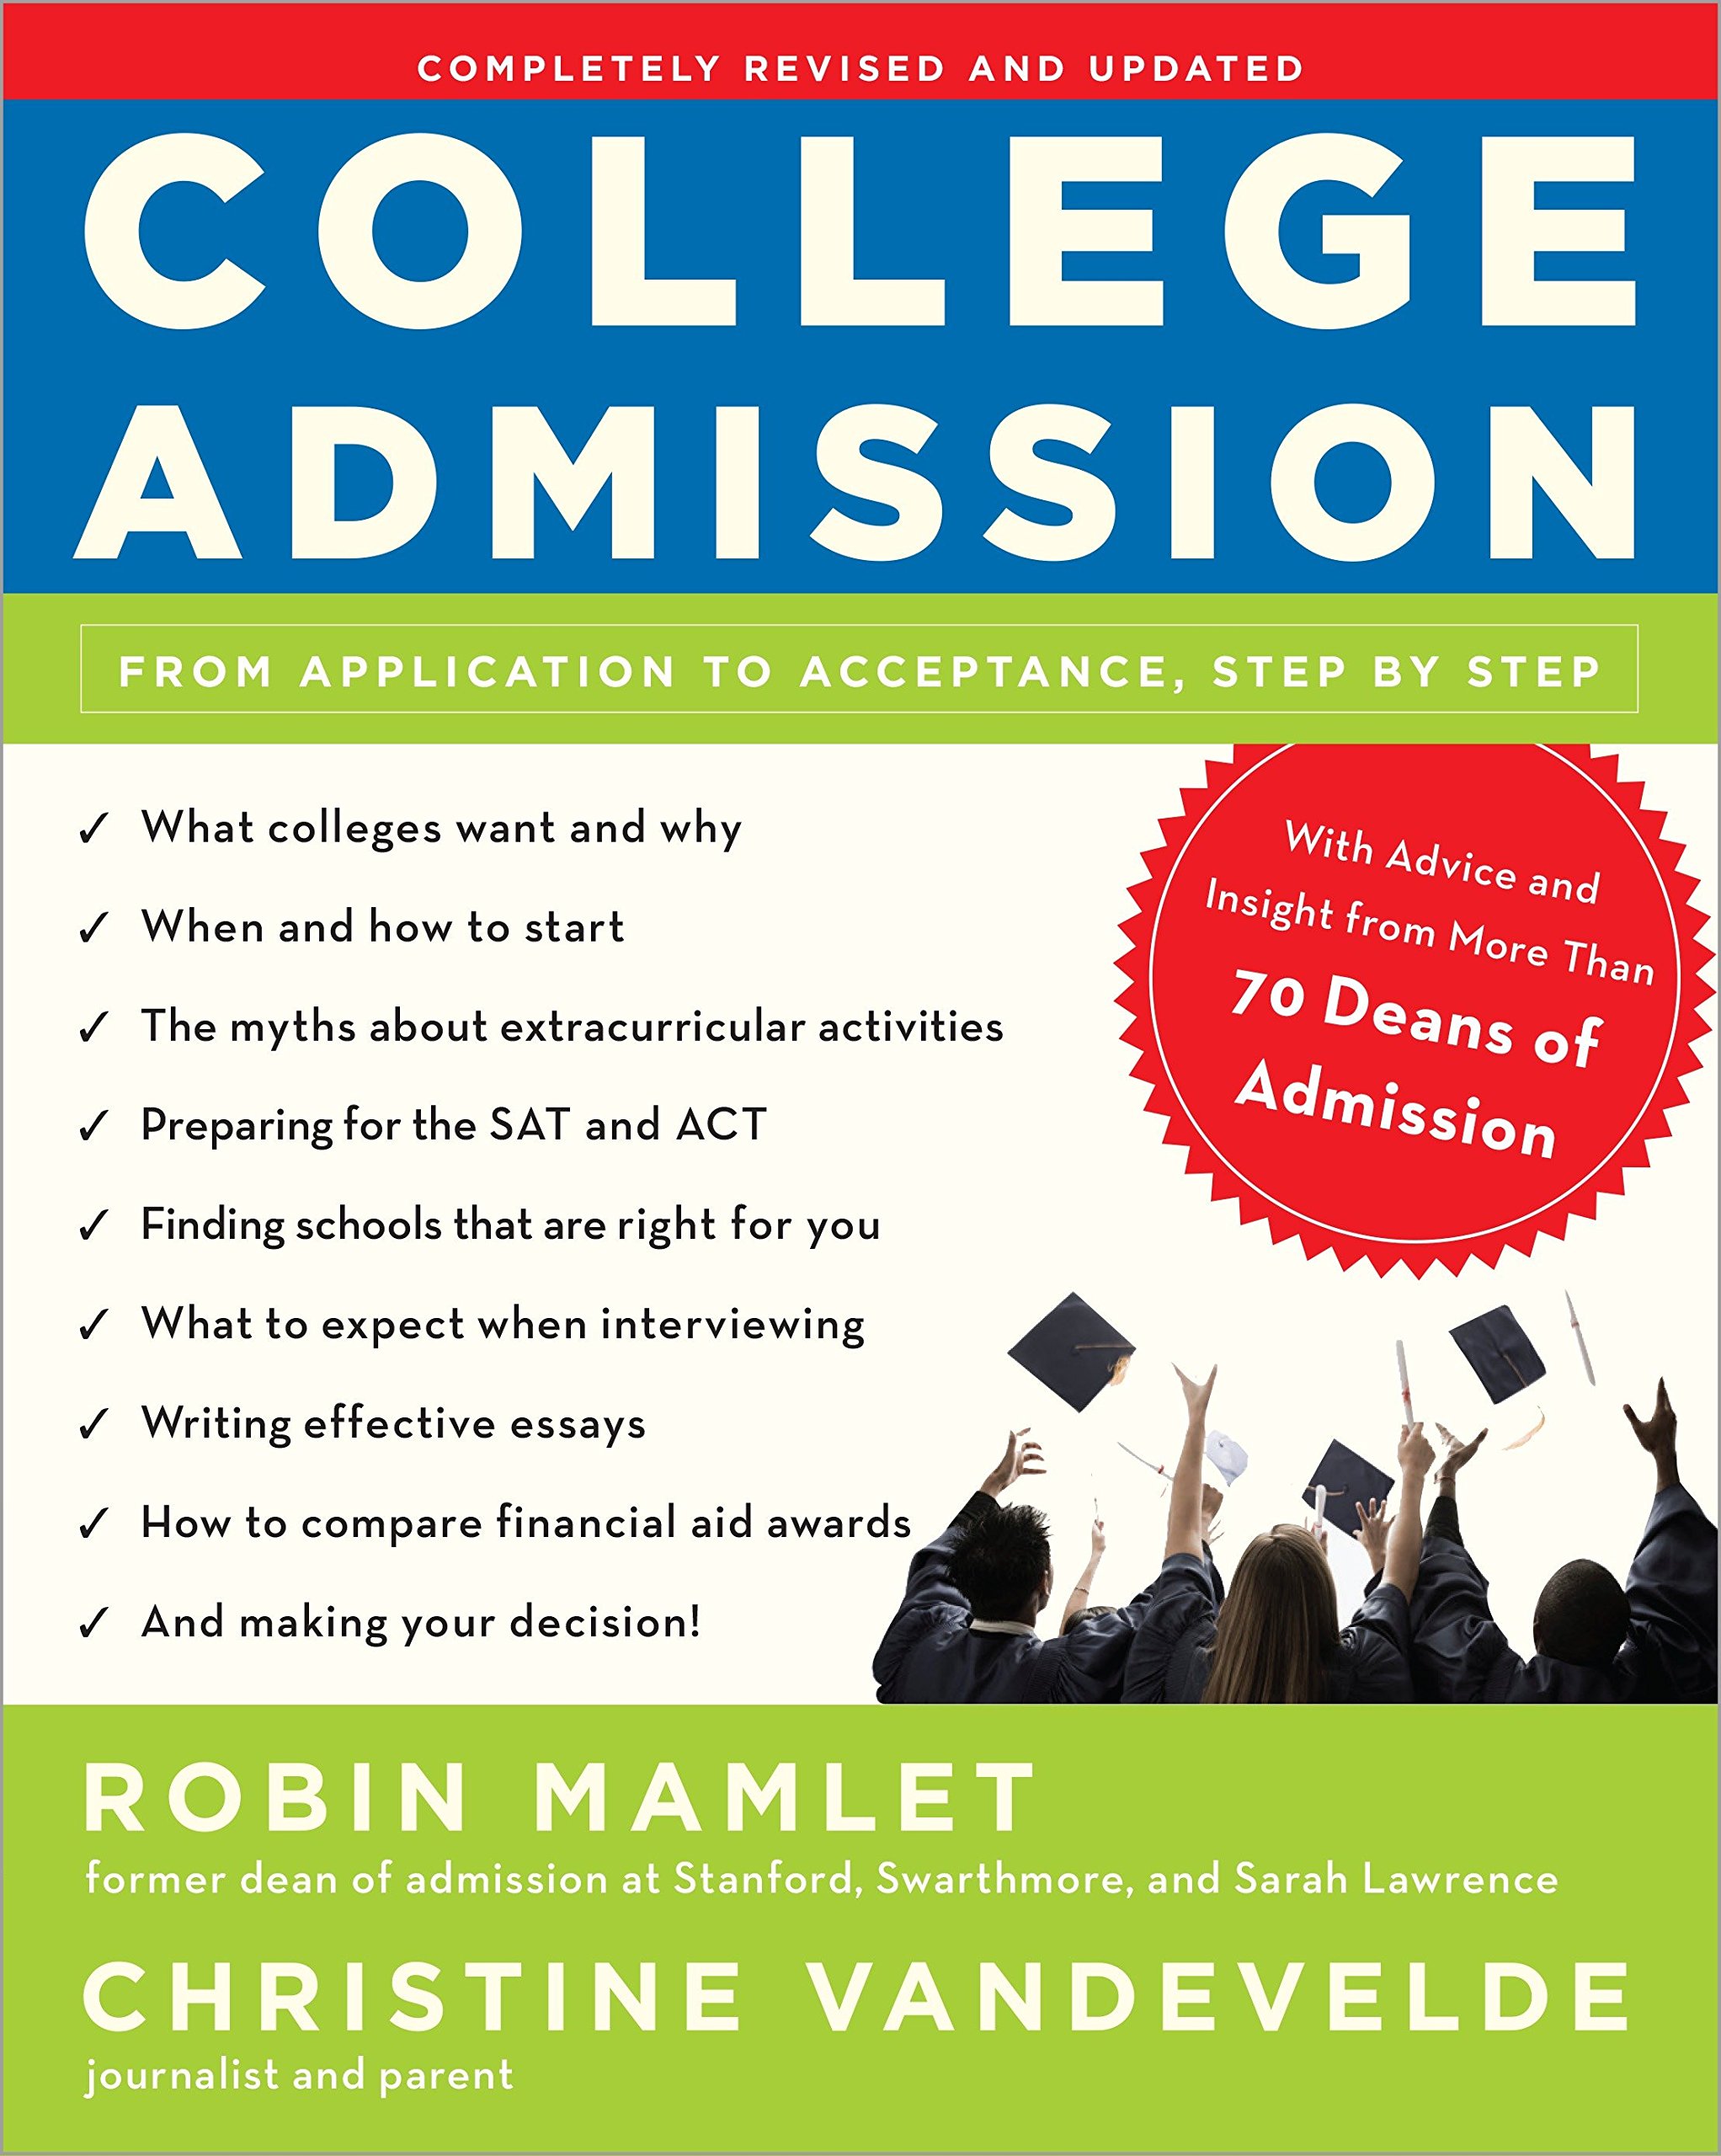 Review of College Admission: From Application to Acceptance, Step by Step